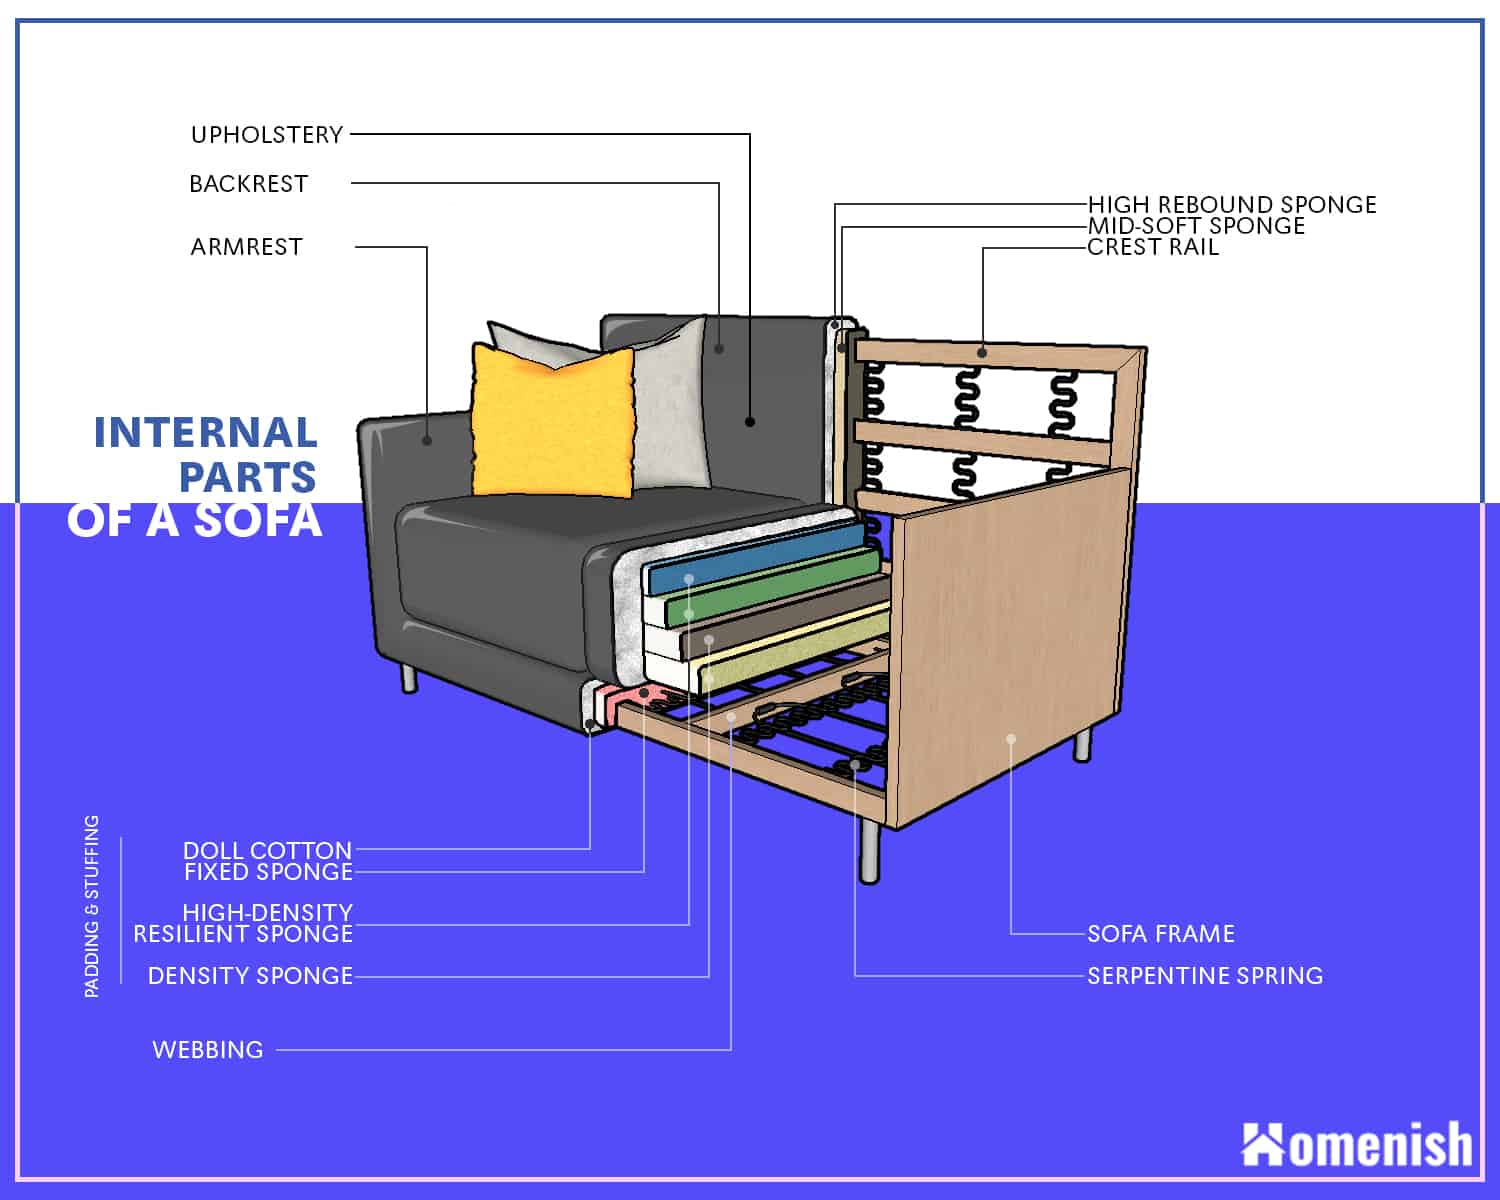 Main Parts Of A Sofa And Couch 2, What Is The Back Of A Sofa Called